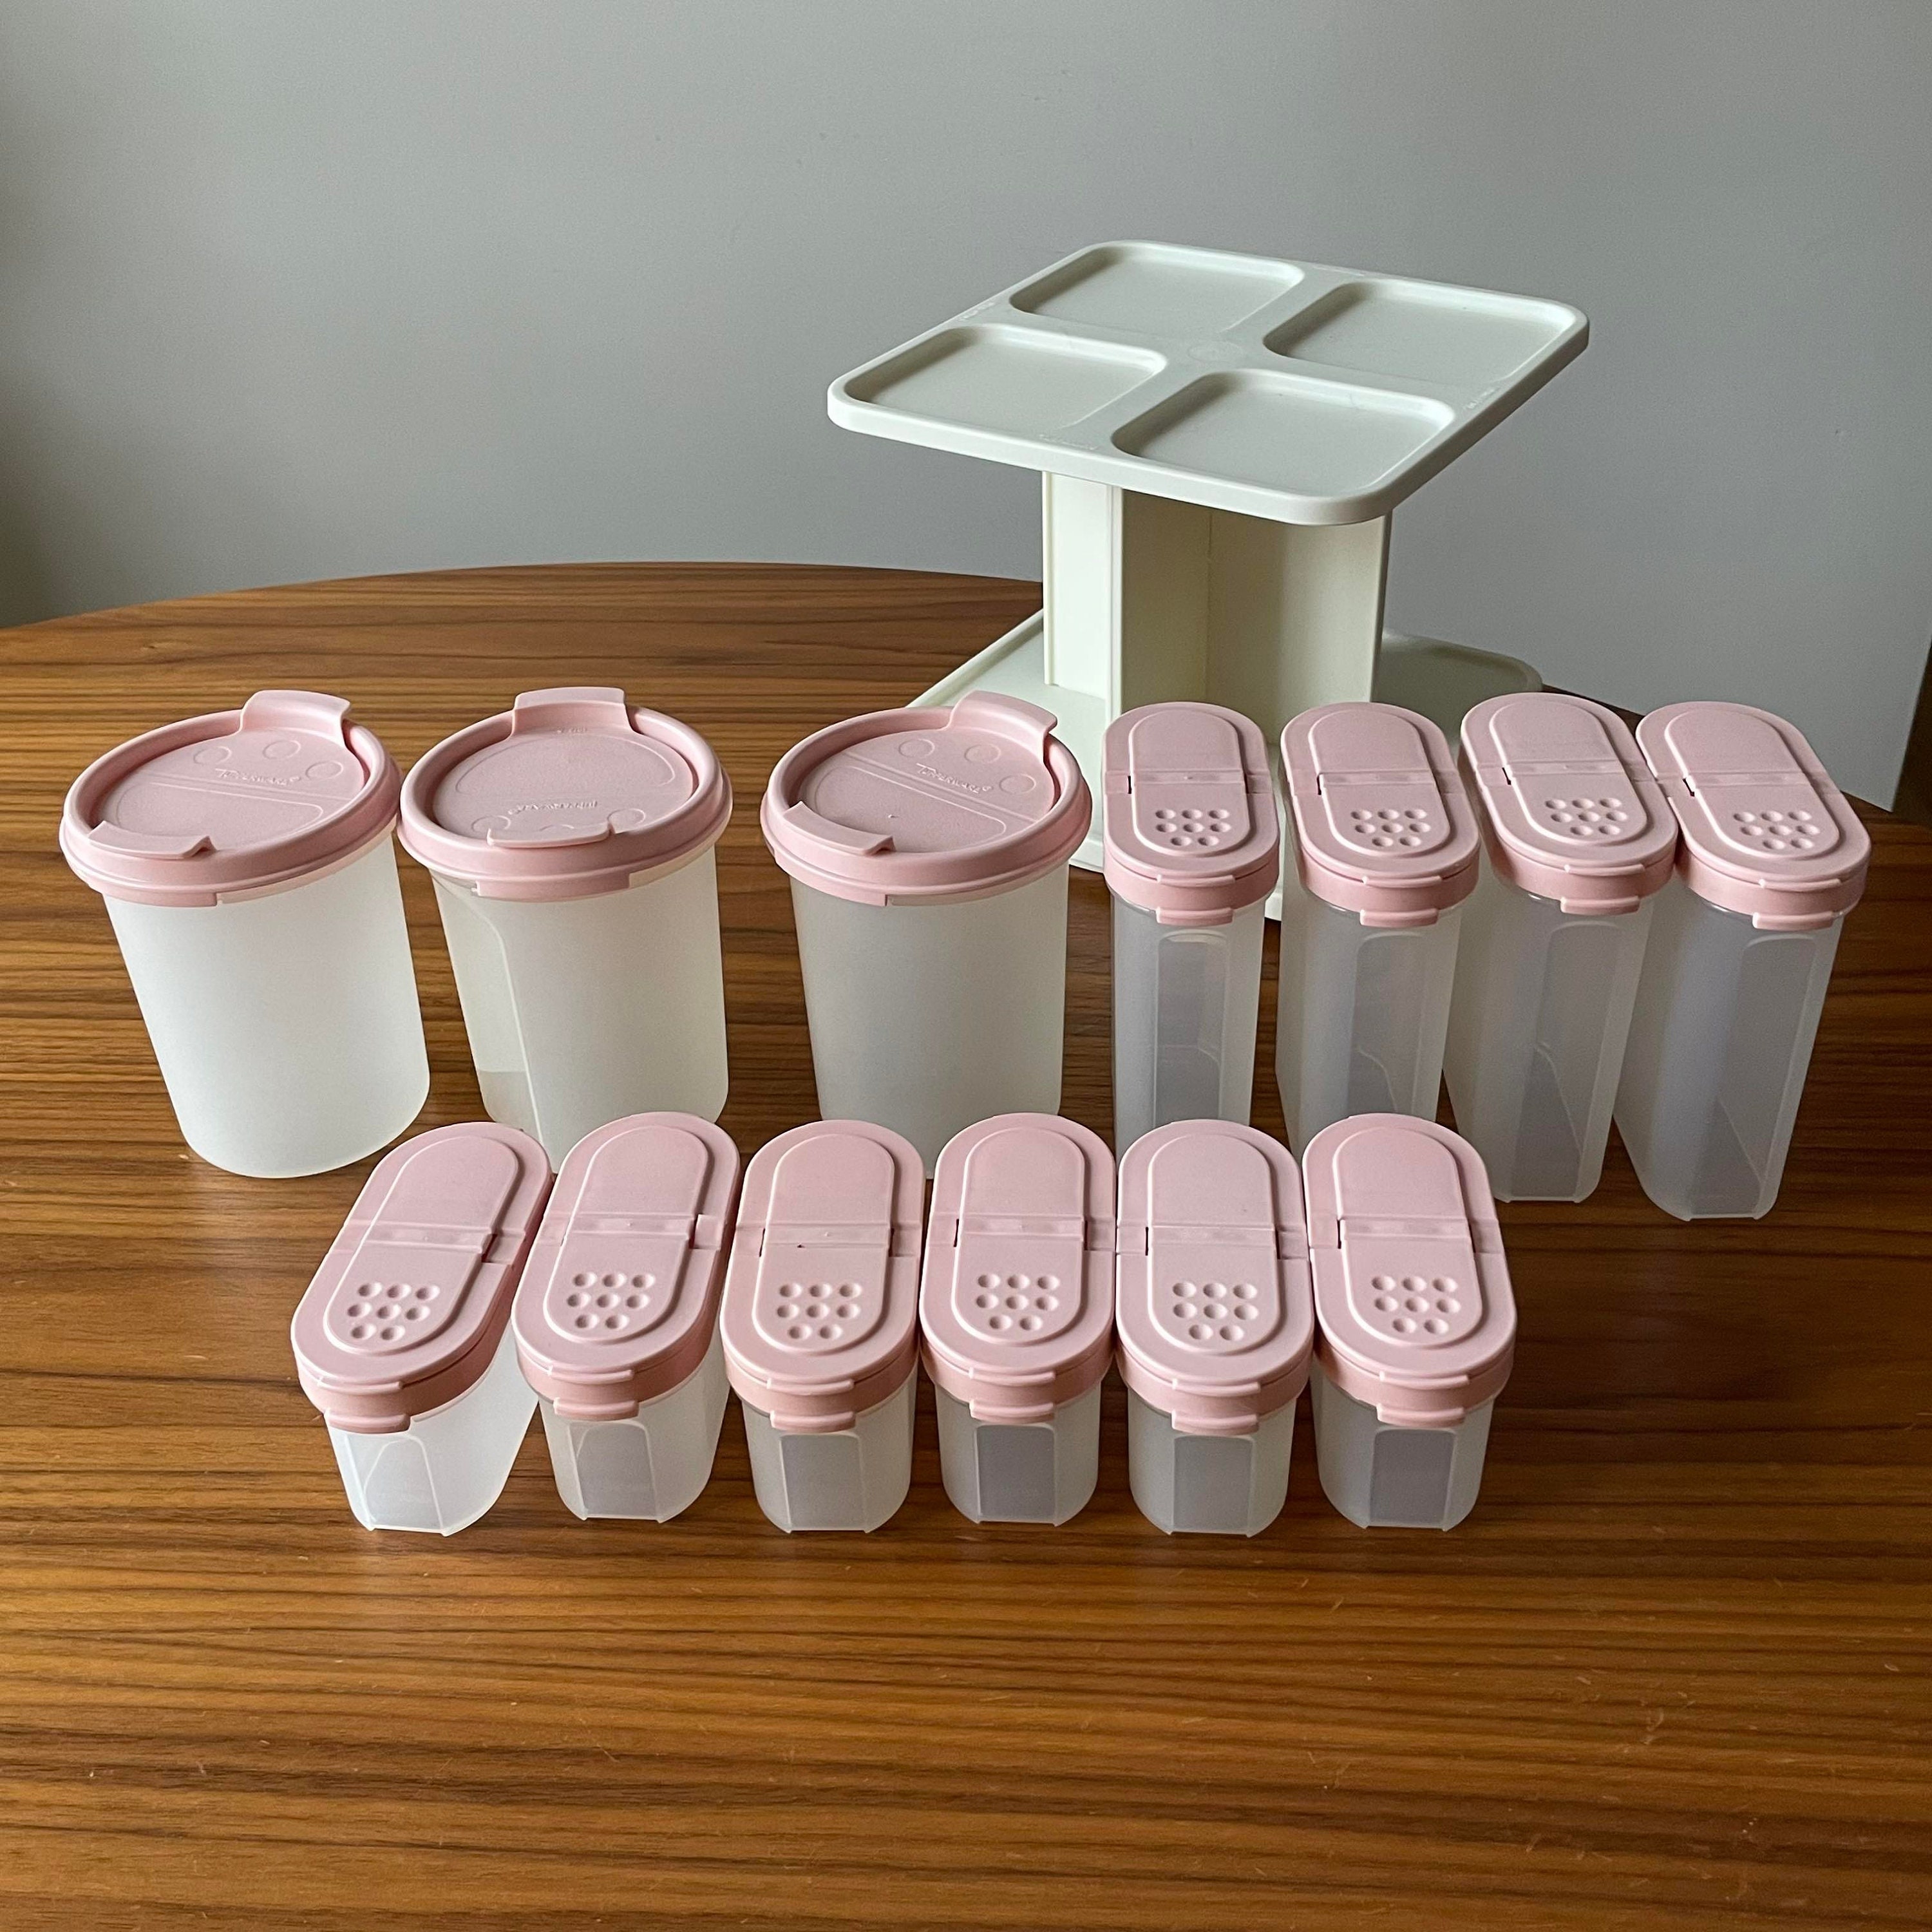 Reserved for Dale: Tupperware Carousel Spice Rack/ 16 Pink Modular